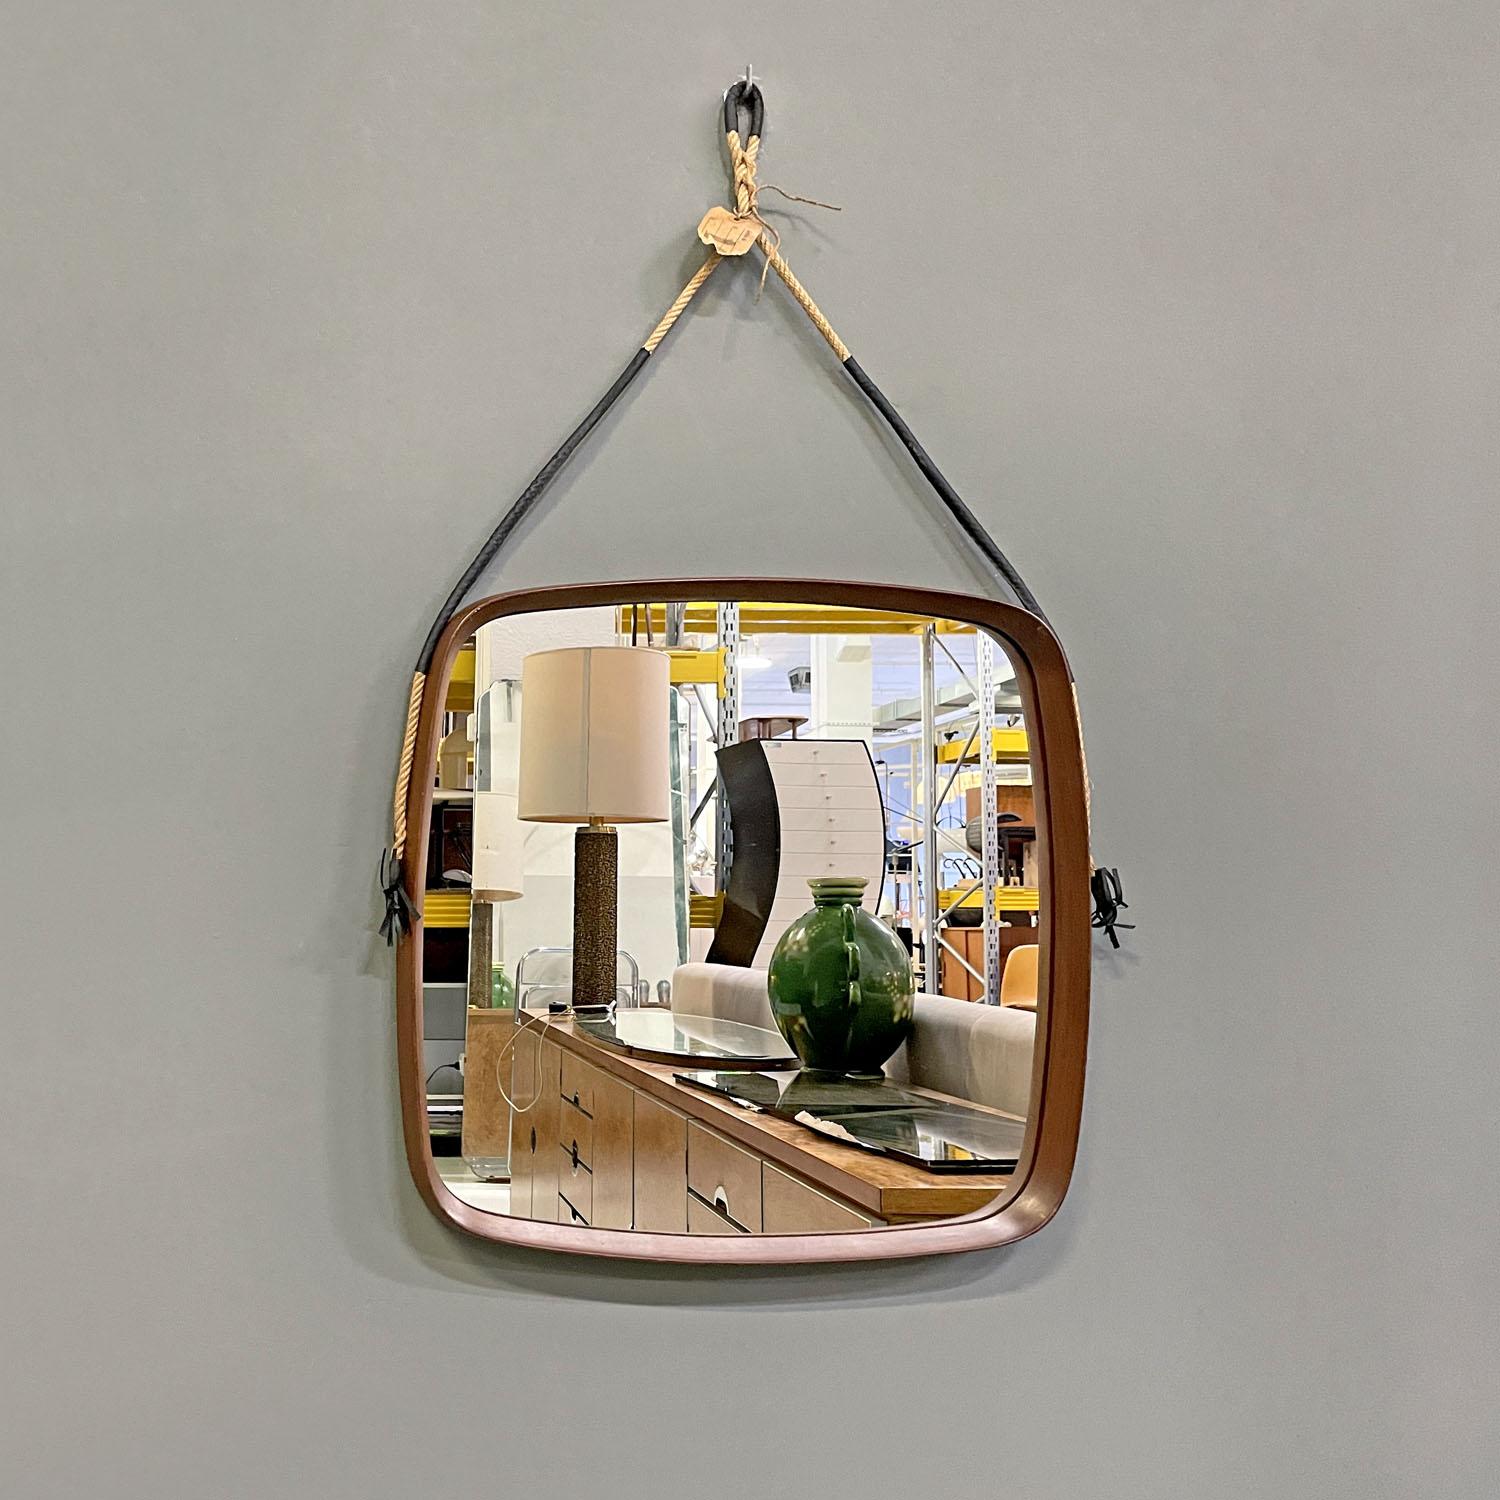 Italian mid-century modern squared wooden wall mirror with rope, 1960s
Square wooden wall mirror. The frame features soft, curved lines. The frame is thick and the mirror part remains internal. To hang the mirror on the wall there is a rope that